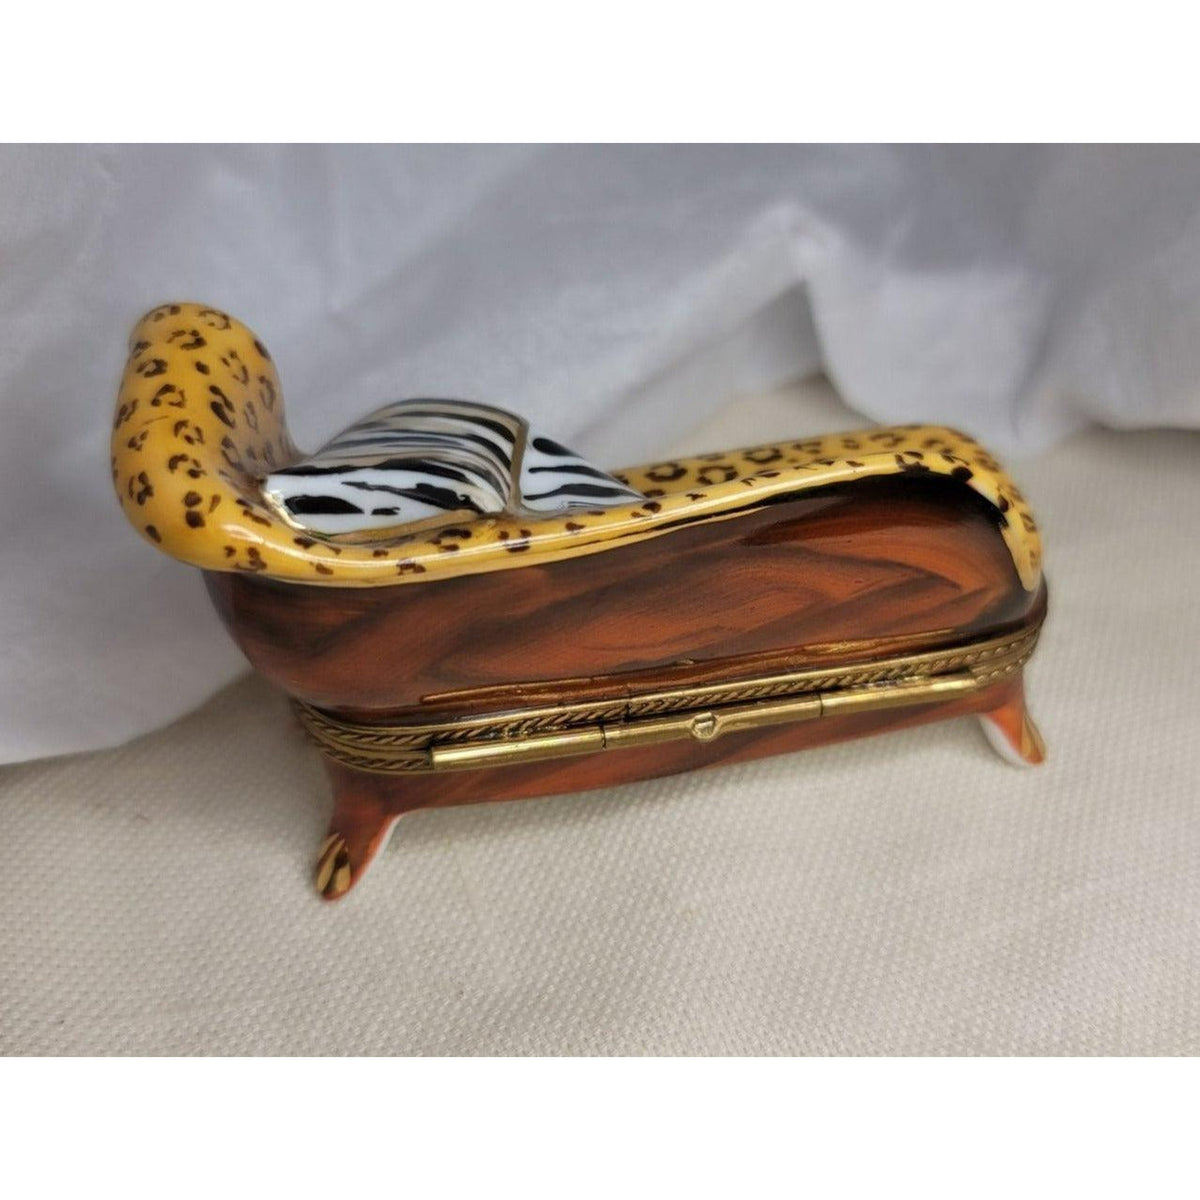 Leopard Chair Lounge Couch No. 1 of 500 cheetah Retired Rare Limoges Box Figurine - Limoges Box Boutique